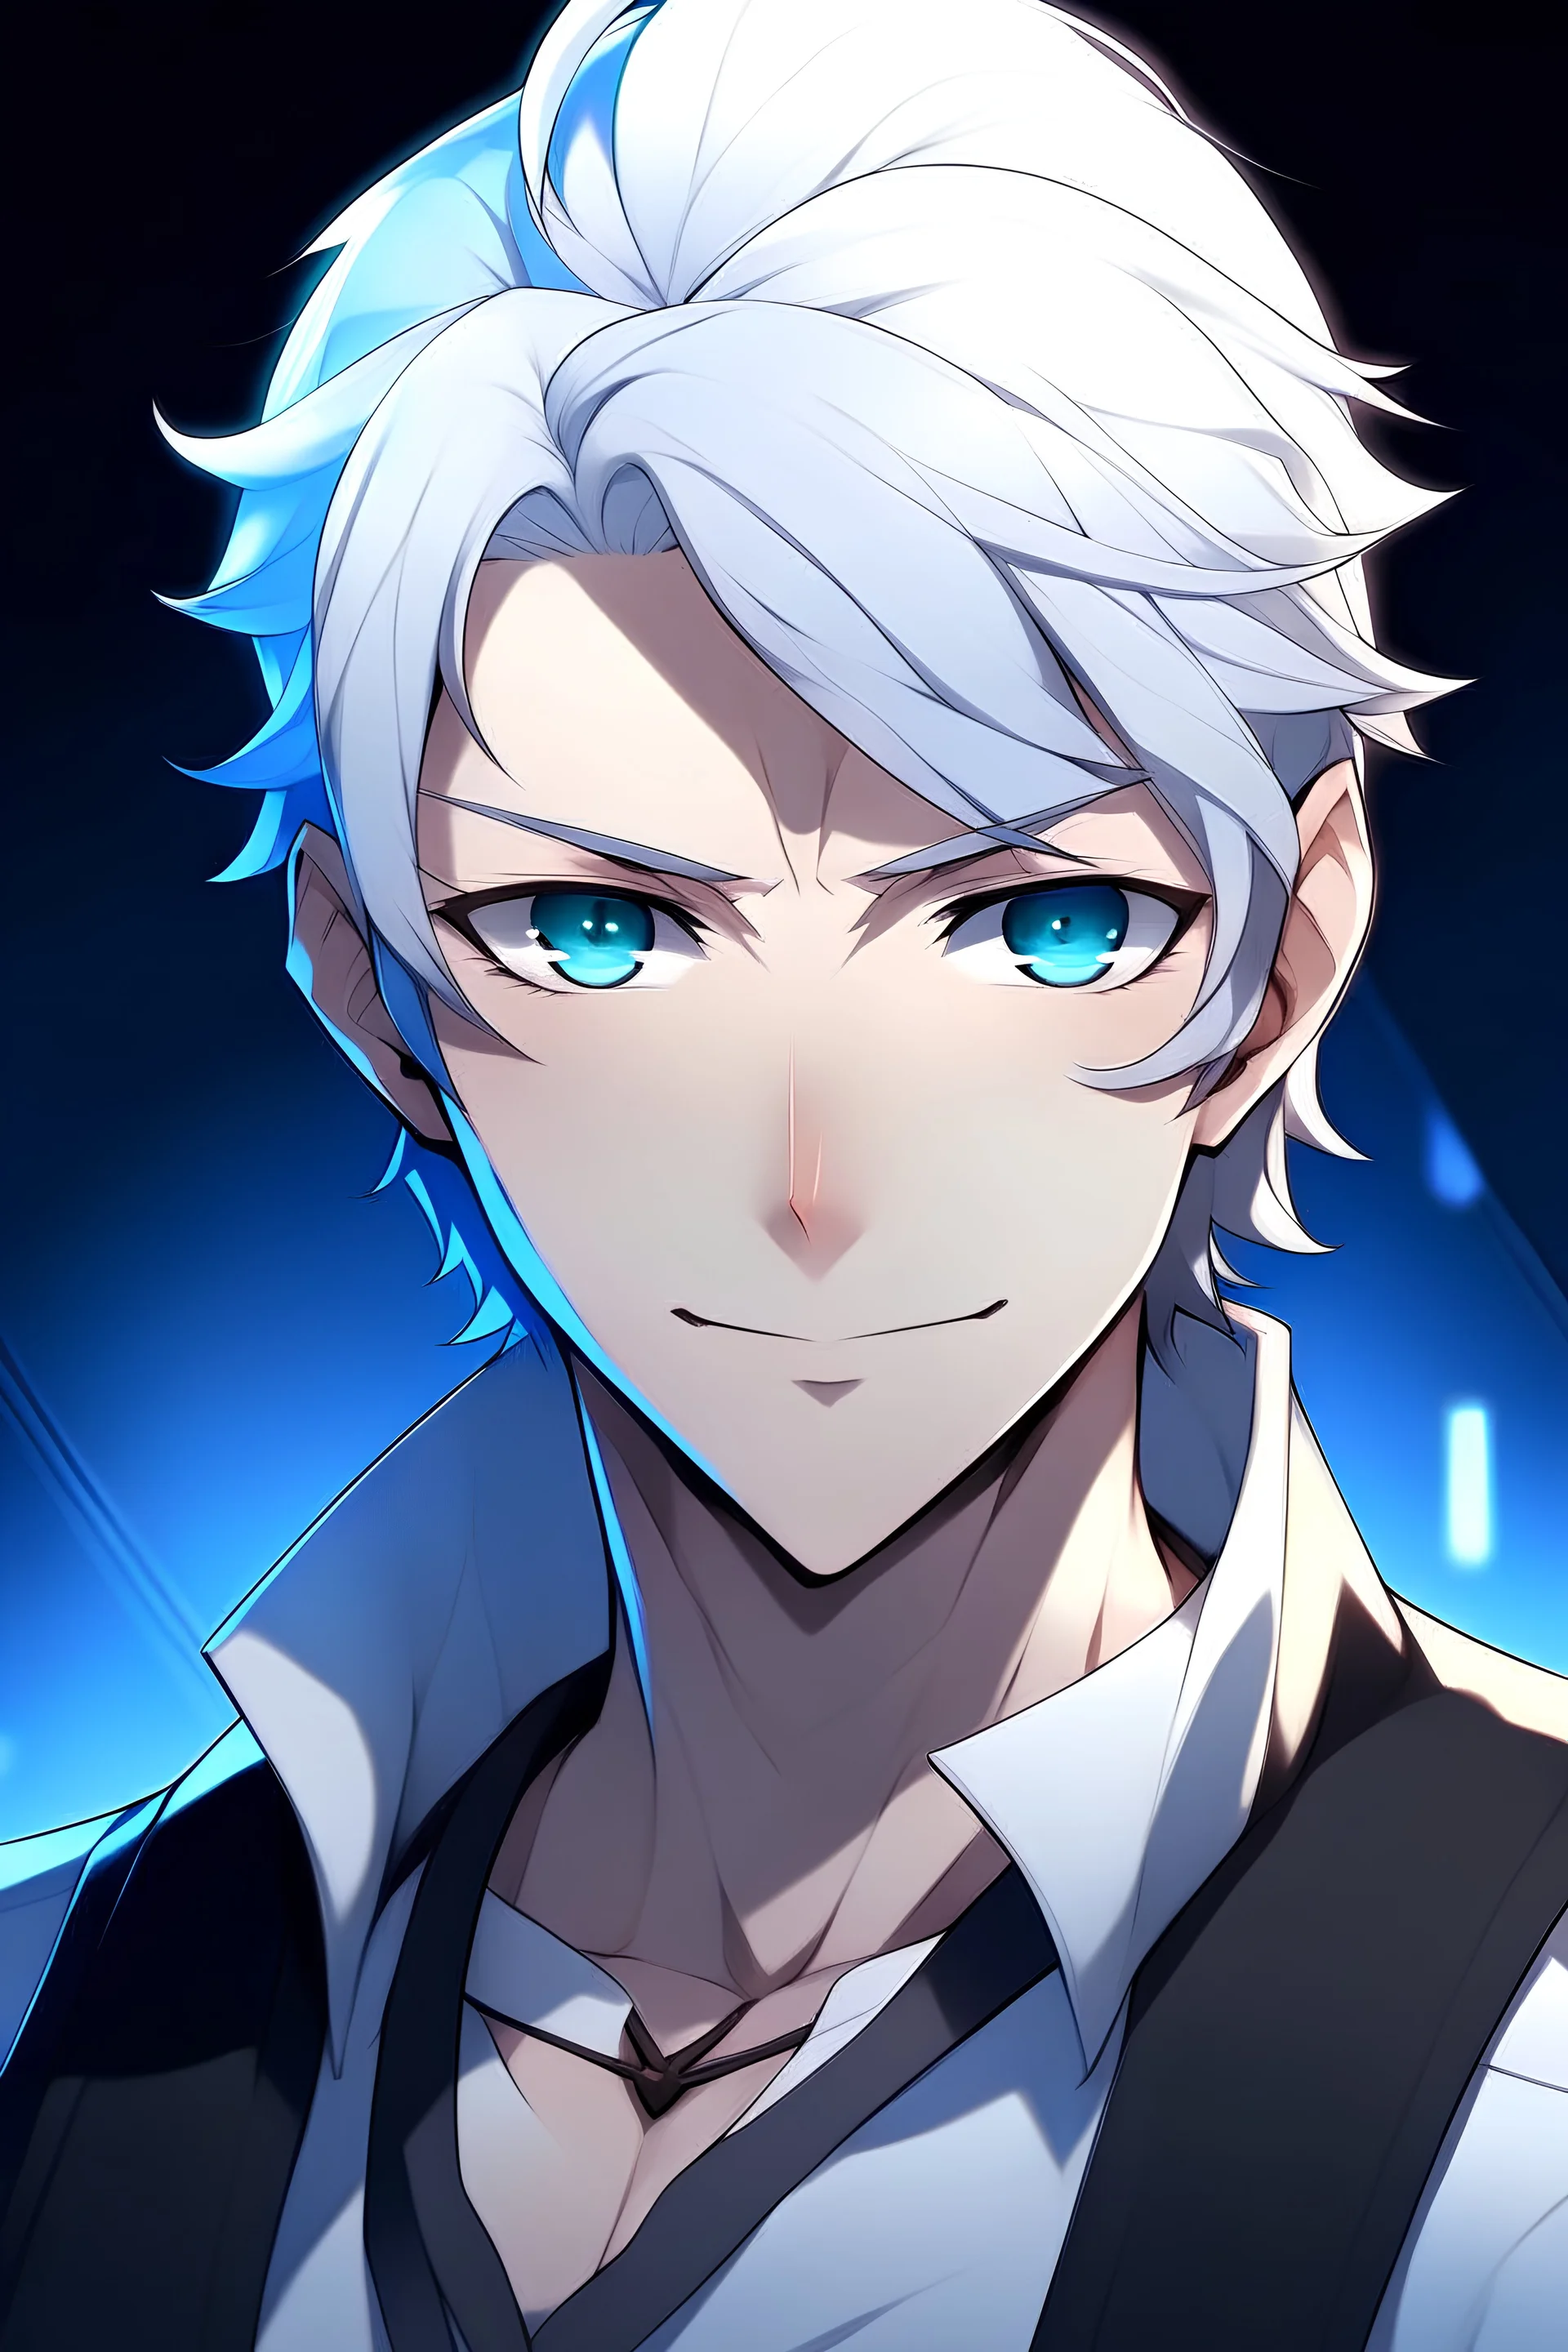 Anime Man main character with blue eyes, white hair, white skin, nice hair, smart, intelligent, strong, lite muscles, aged 25, wearing a sport uniform black